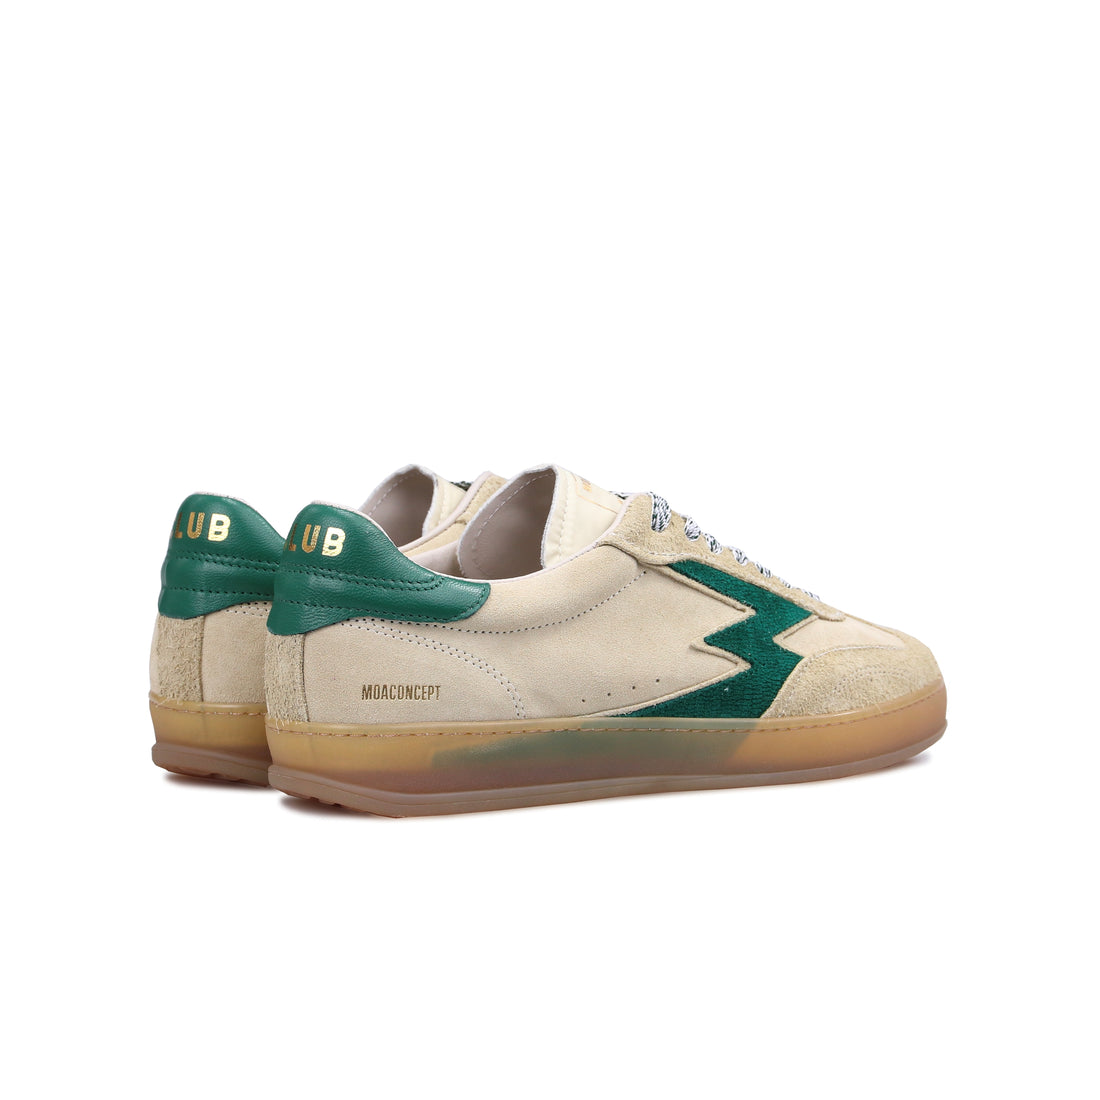 Sand Club sneaker with green logo